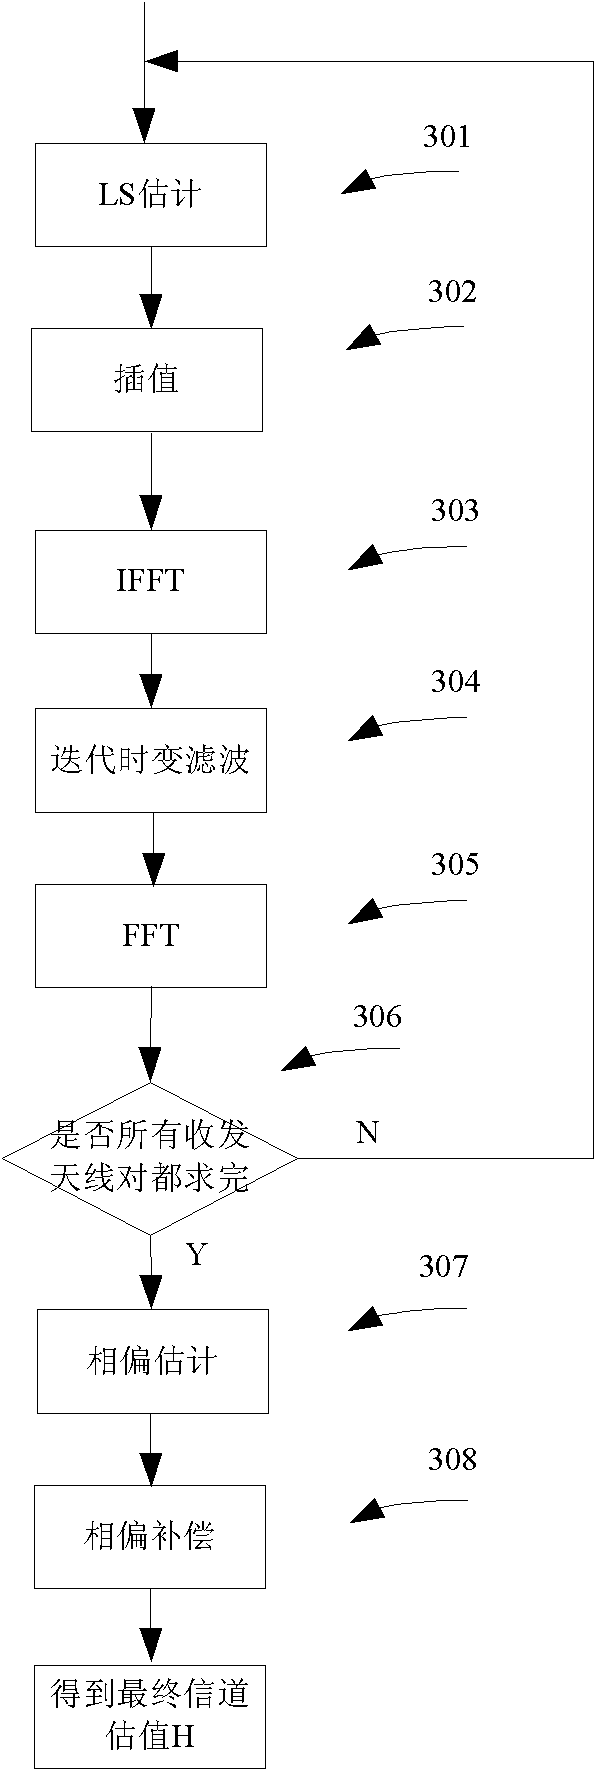 Channel estimation method and device for MIMO (multiple input multiple output) OFDM (orthogonal frequency division multiplexing) system